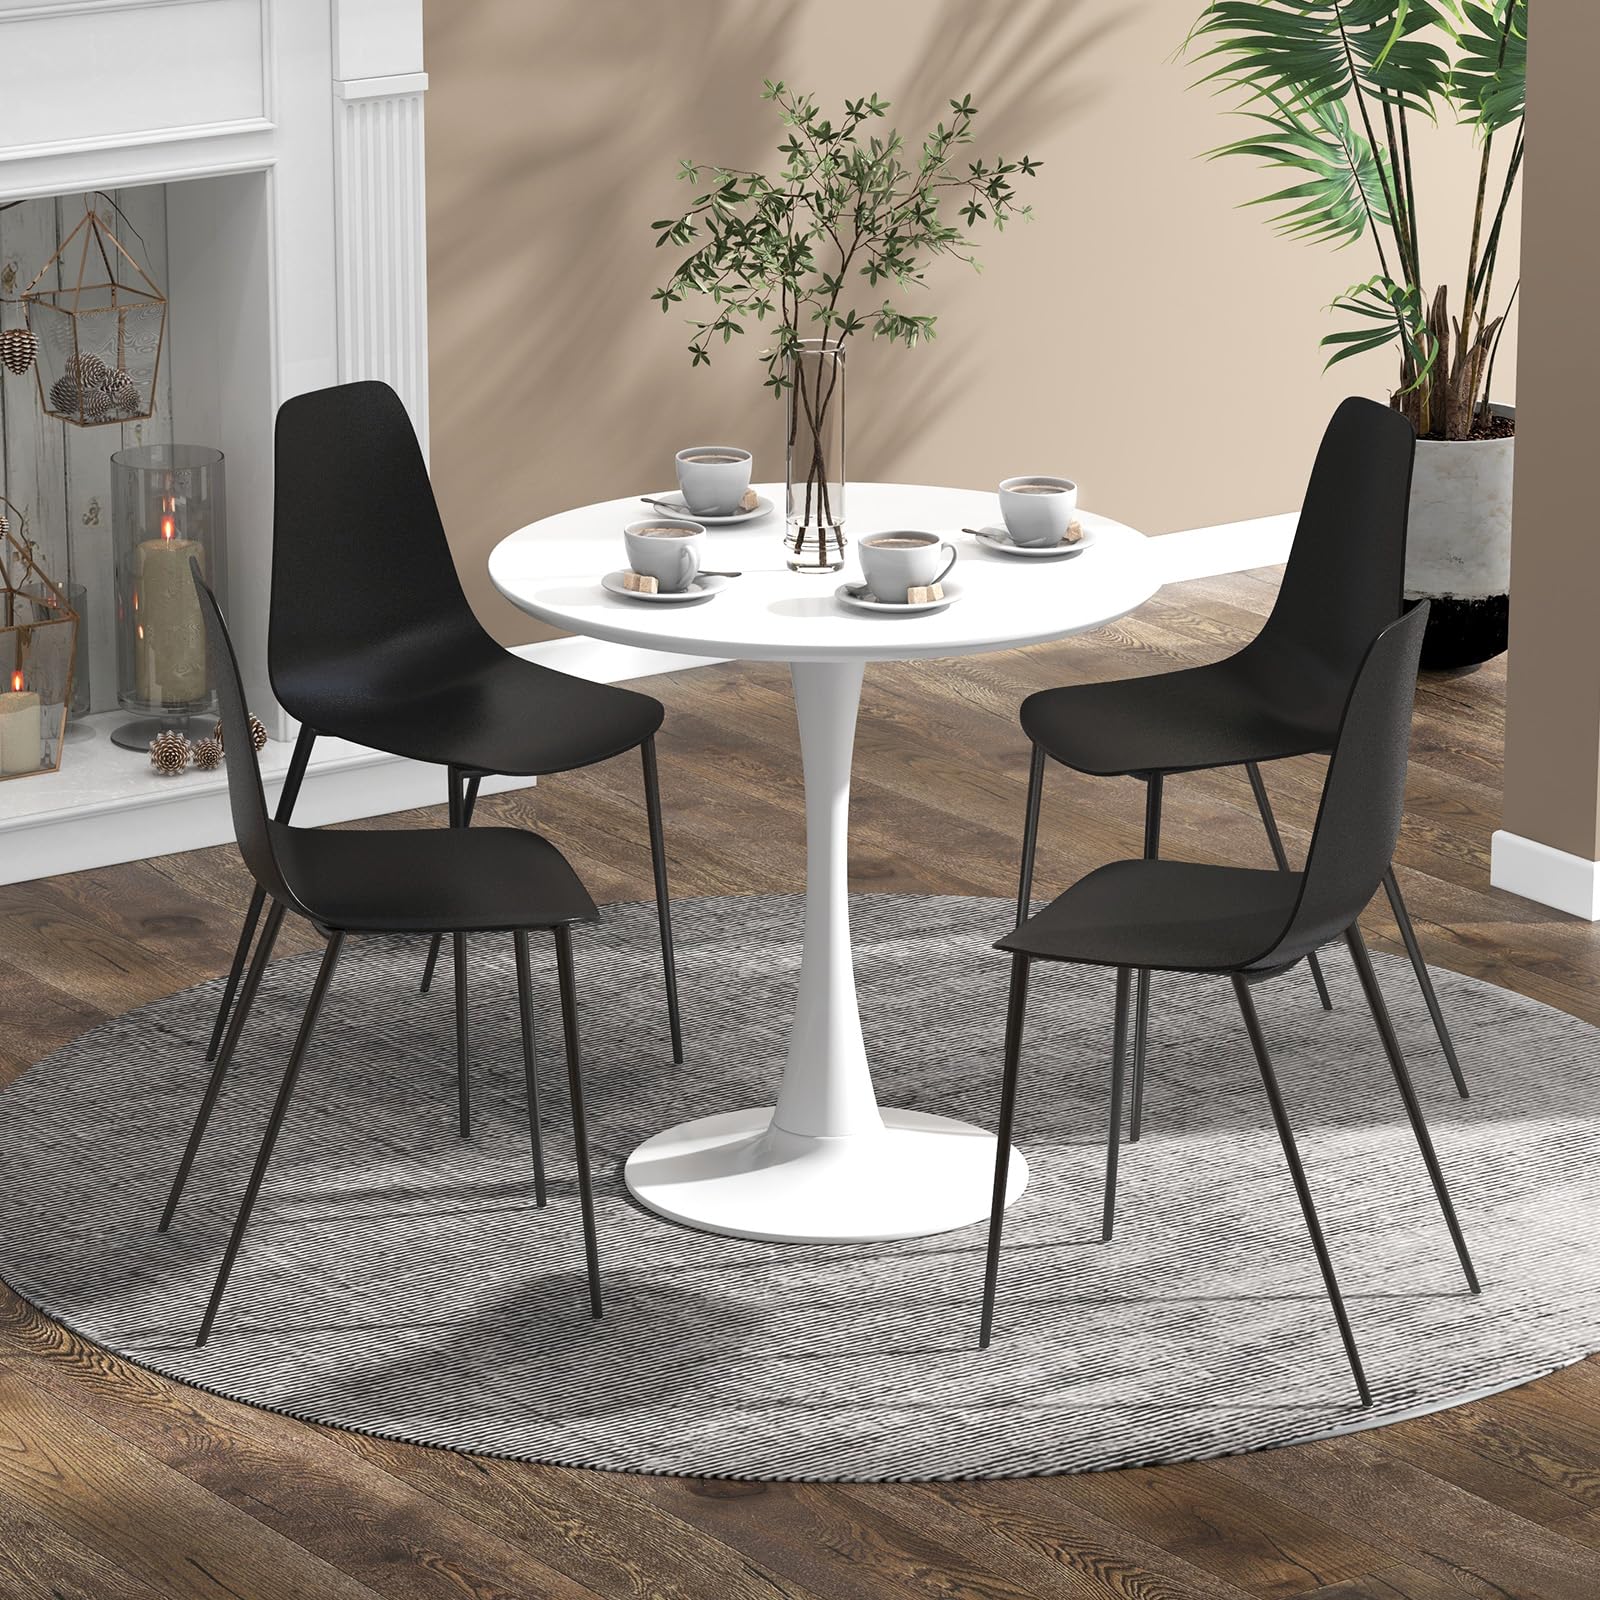 Giantex Modern Dining Chairs Set of 4